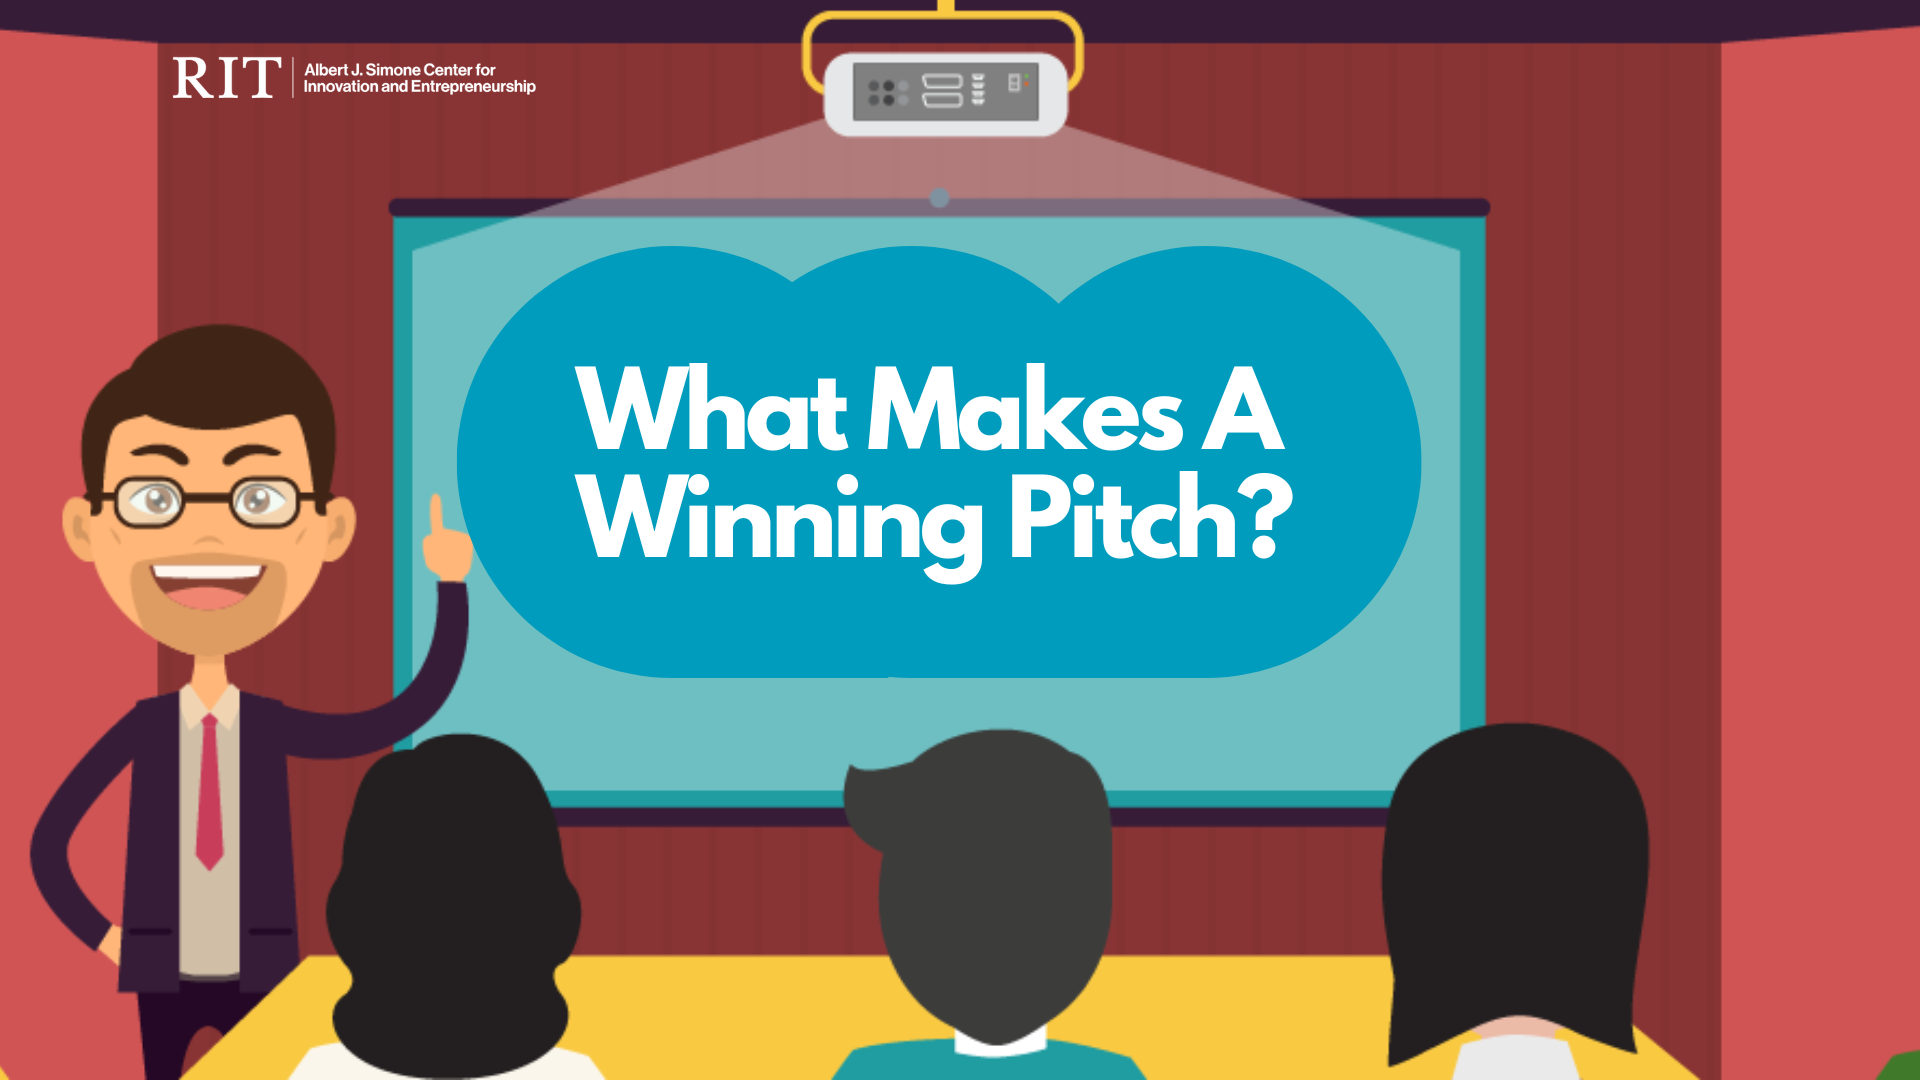 What Makes a Winning Pitch